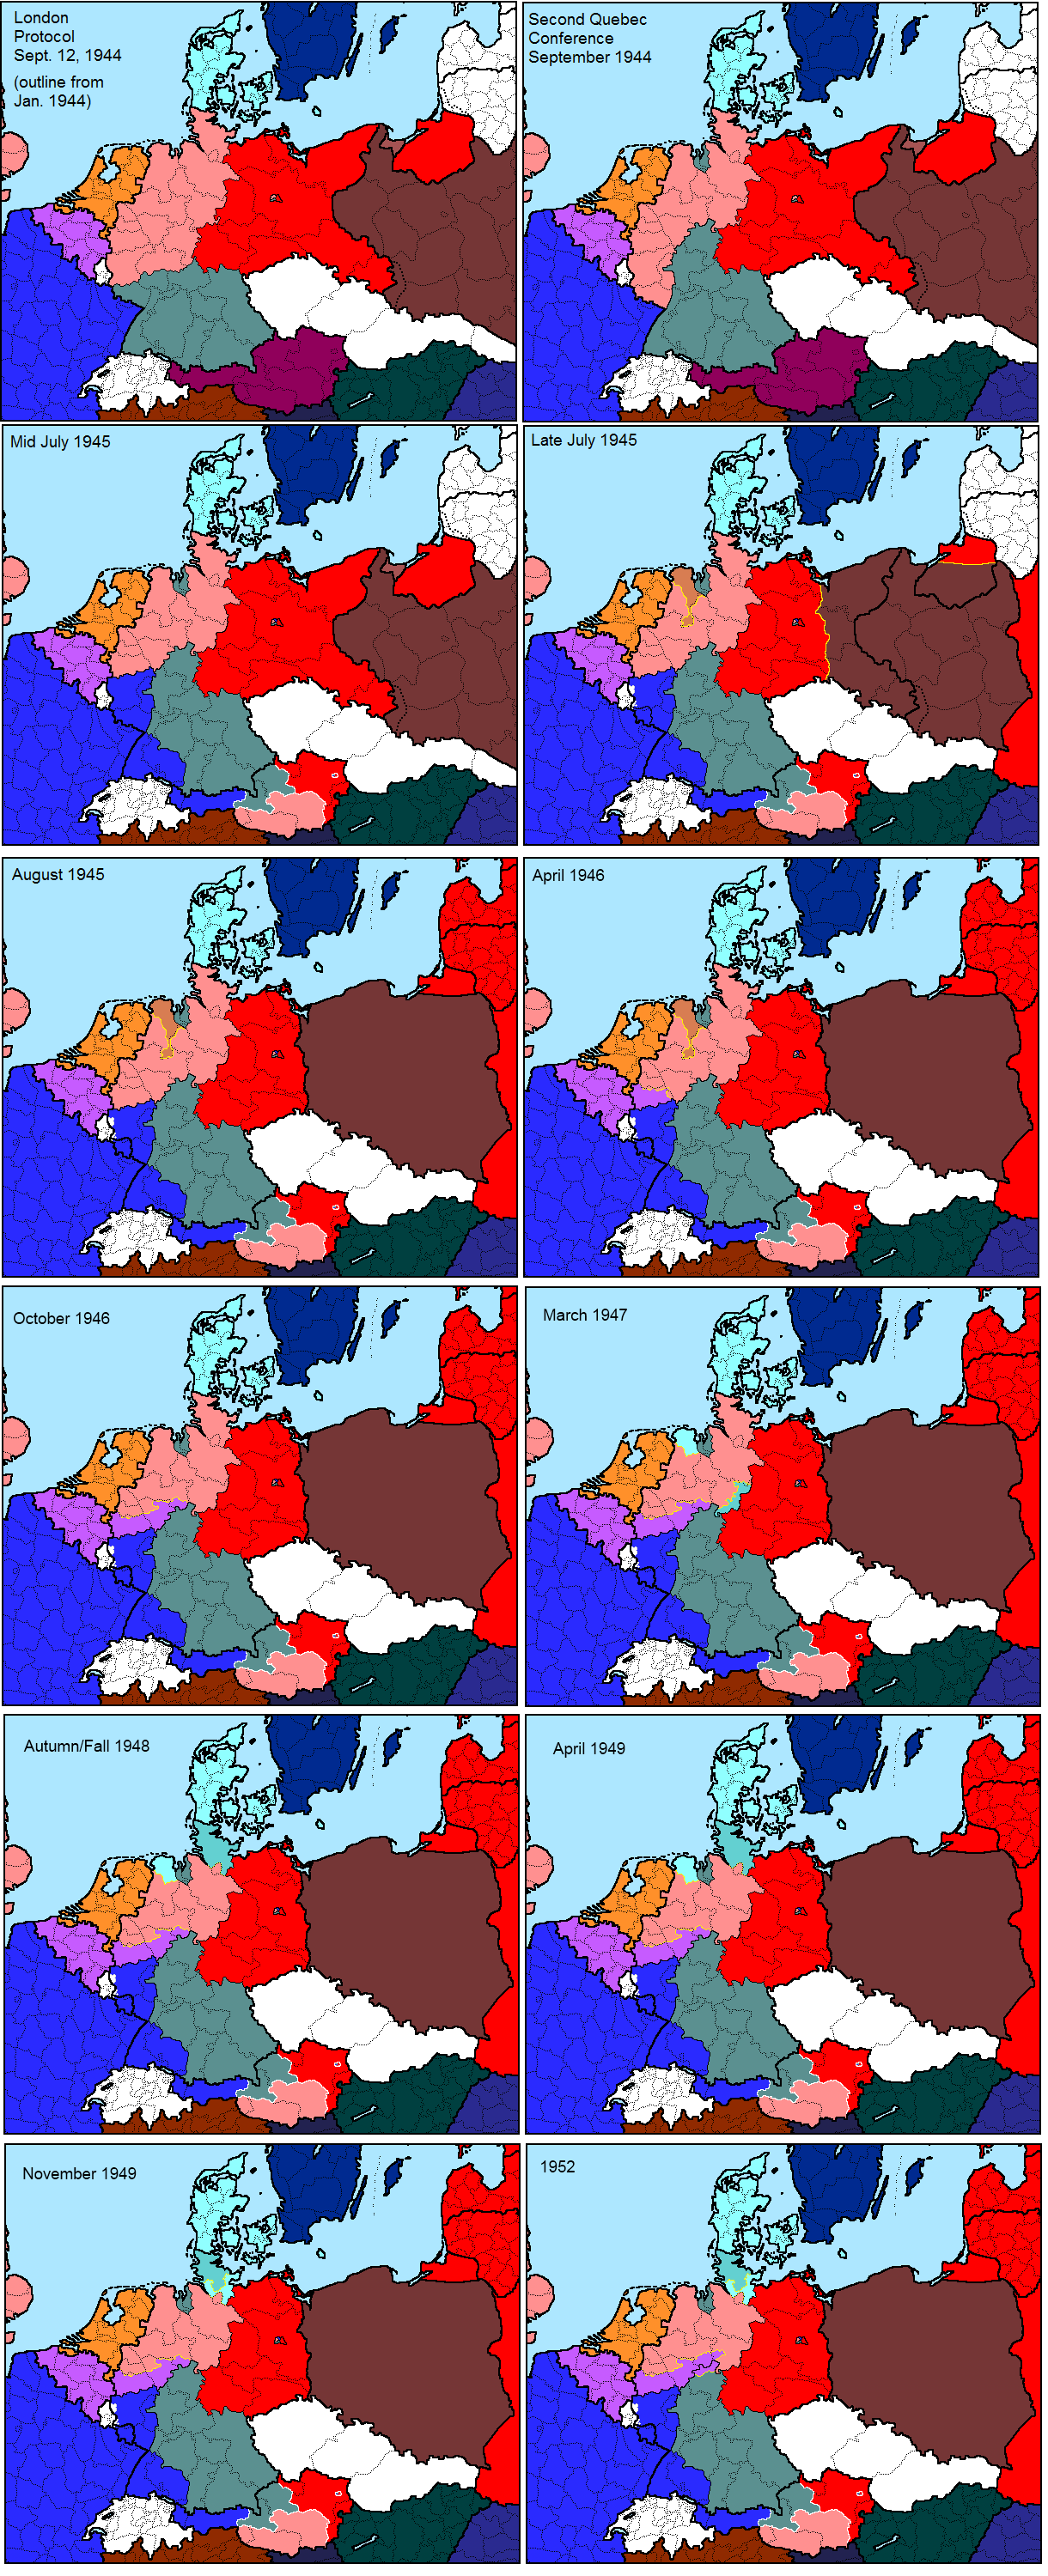 evolution of the occupation zones in germany 1943-1952.png